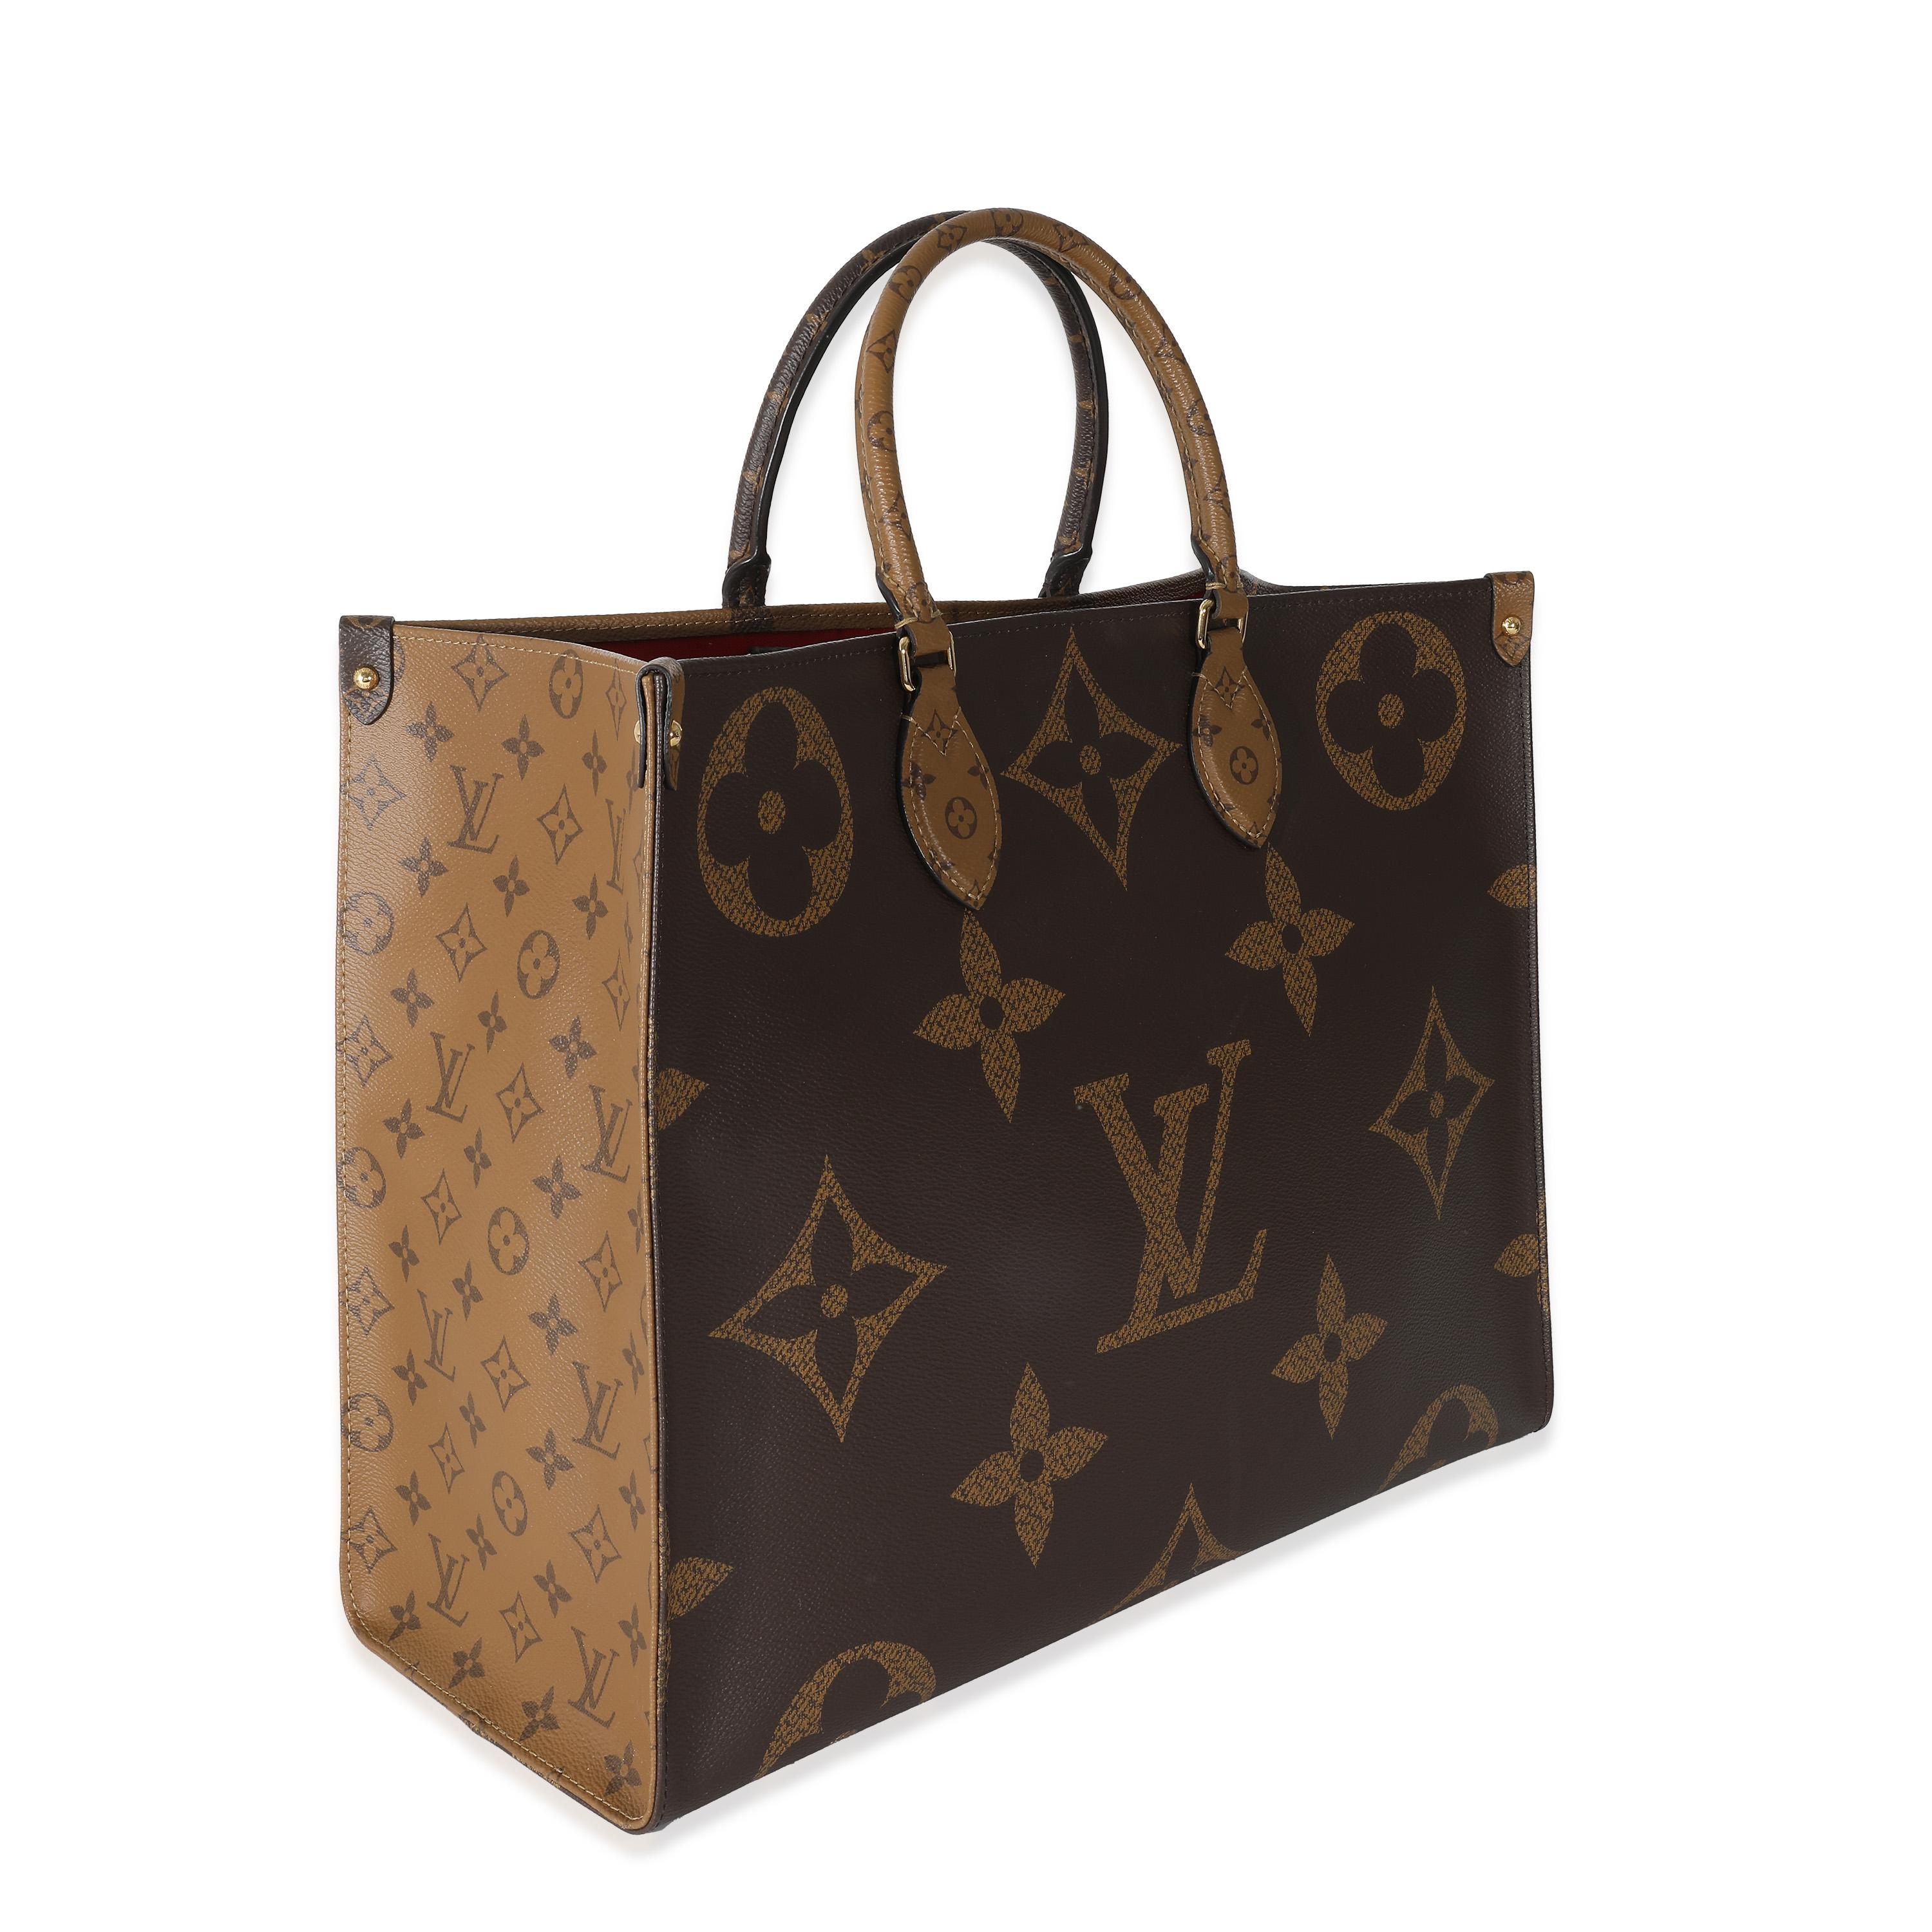 Listing Title: Louis Vuitton Reverse Monogram Canvas On The Go GM
SKU: 136826
MSRP: 3250.00 USD
Condition: Pre-owned 
Condition Description: This bag says it all. The Onthego bag from Louis Vuitton is designed for busy lifestyles. Topped with two